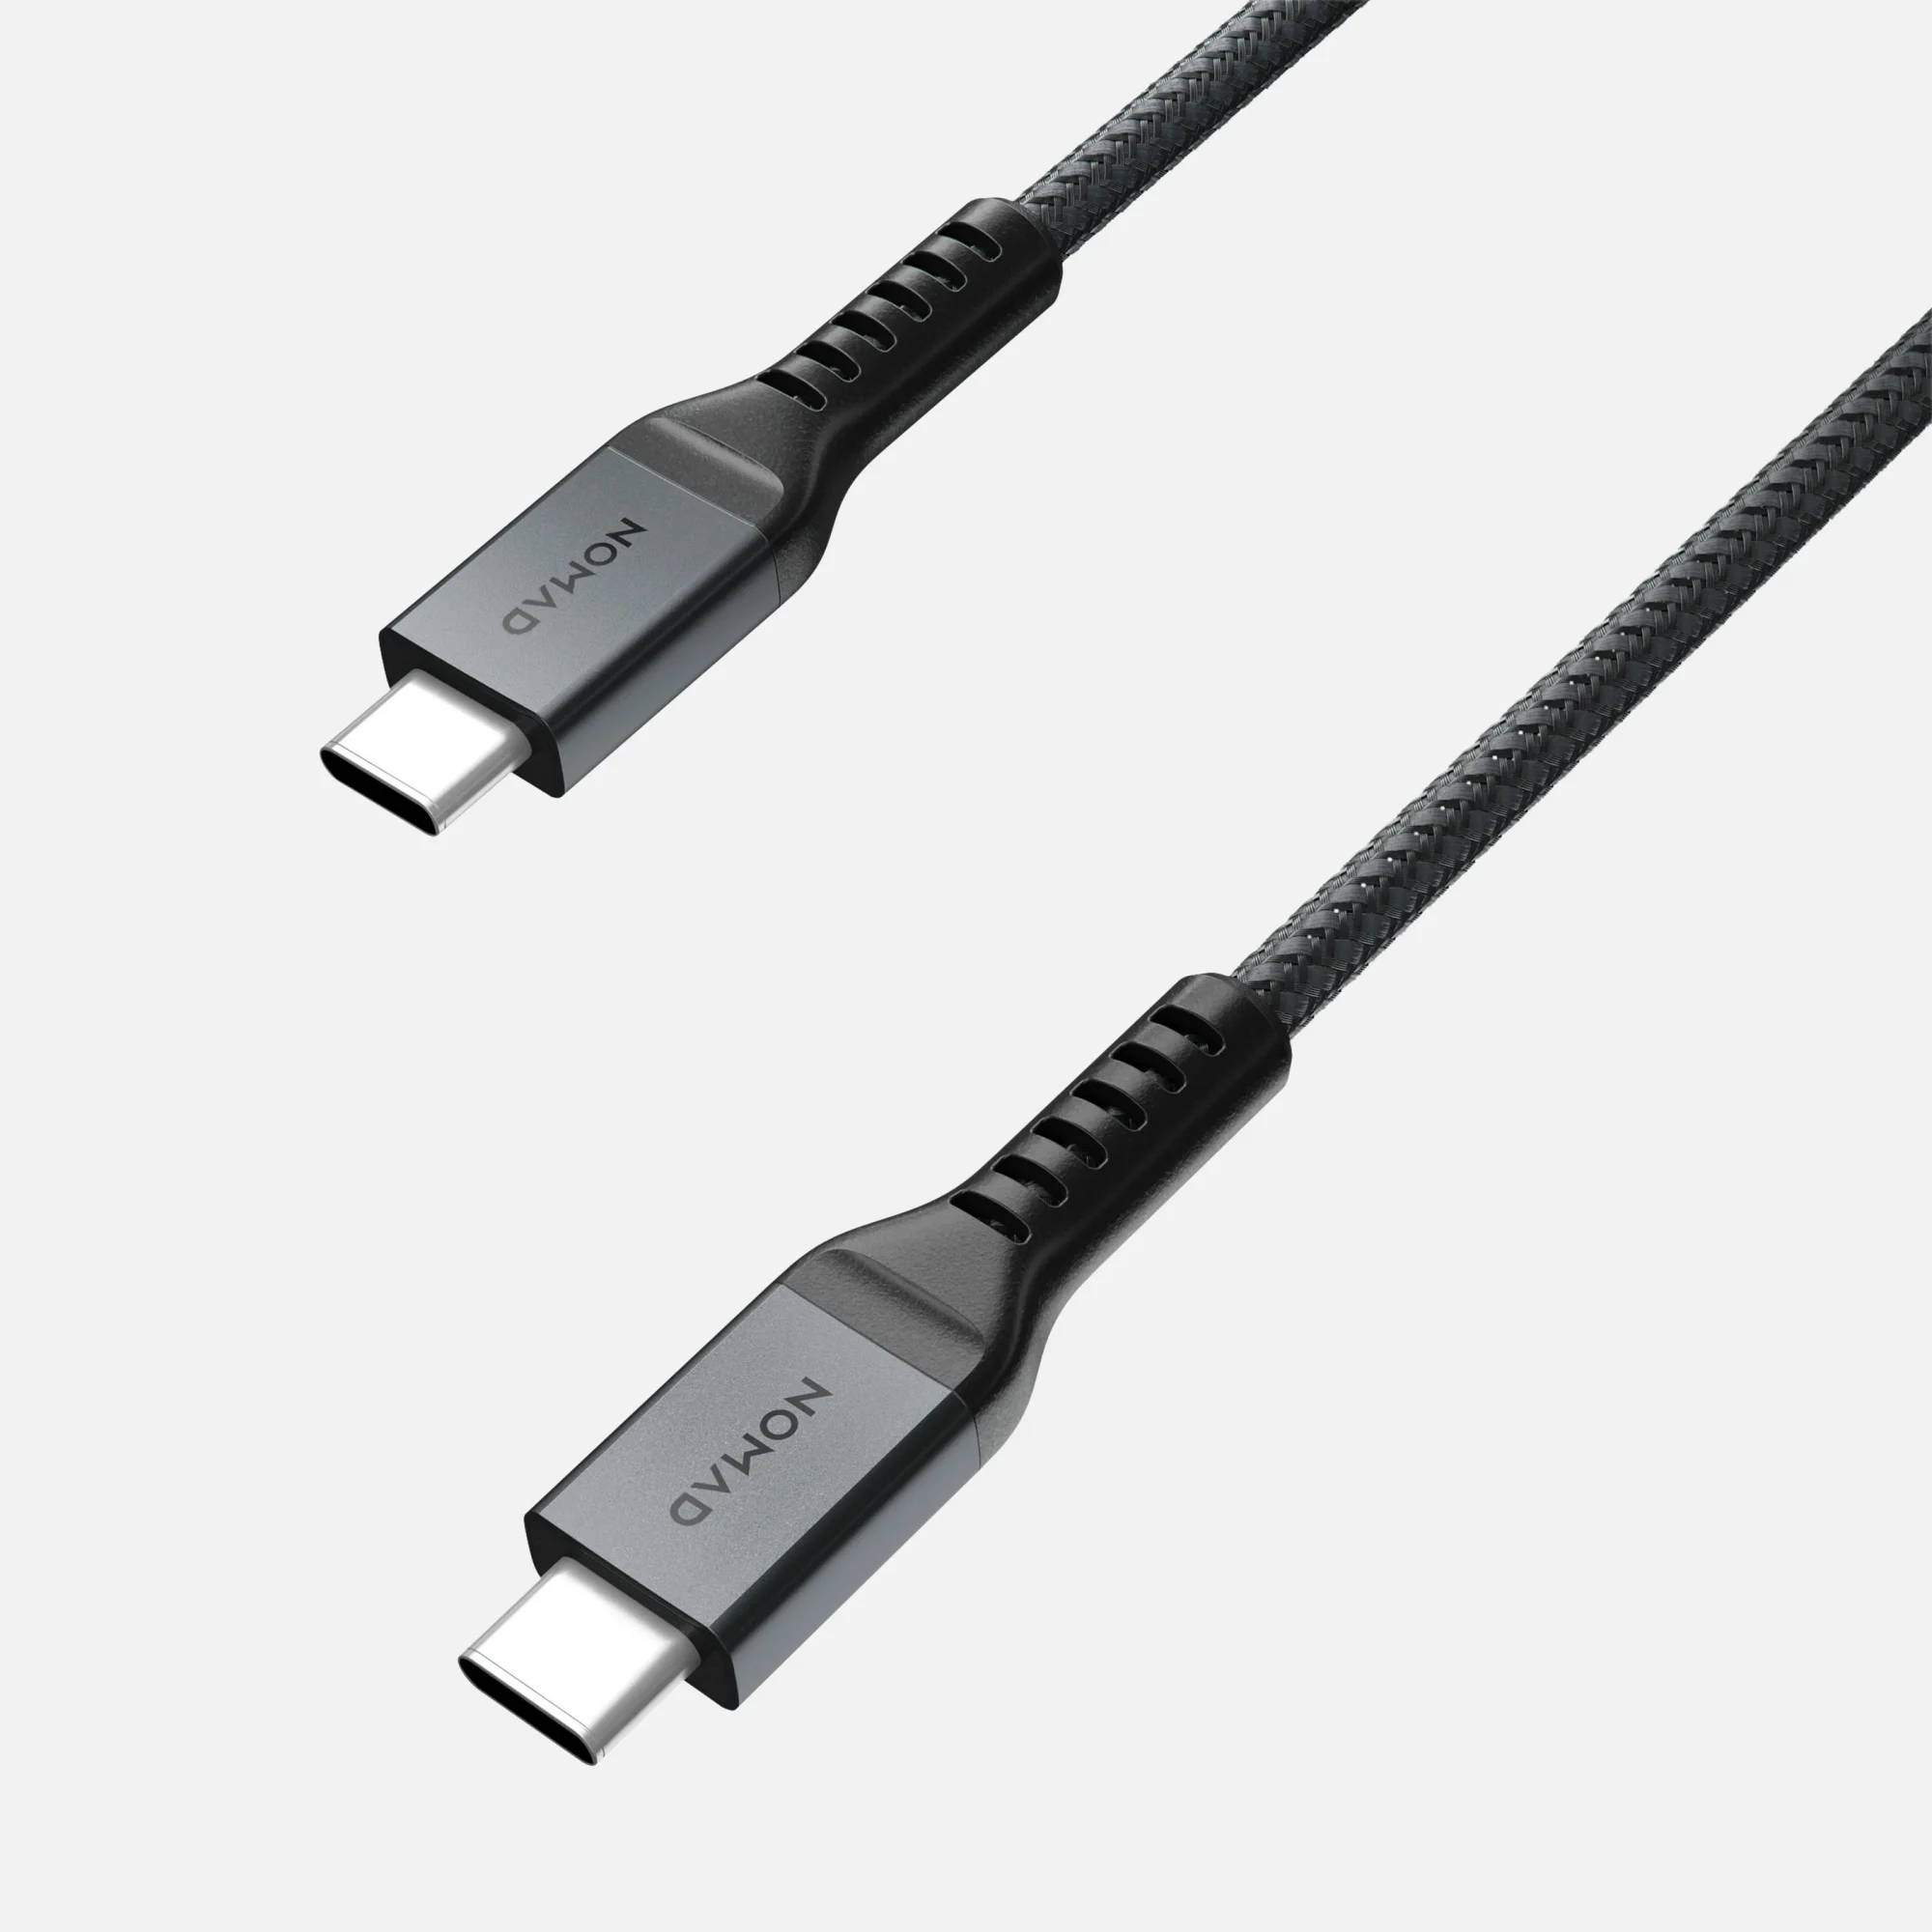 USB Type-C tips on the Nomad USB-C Cable